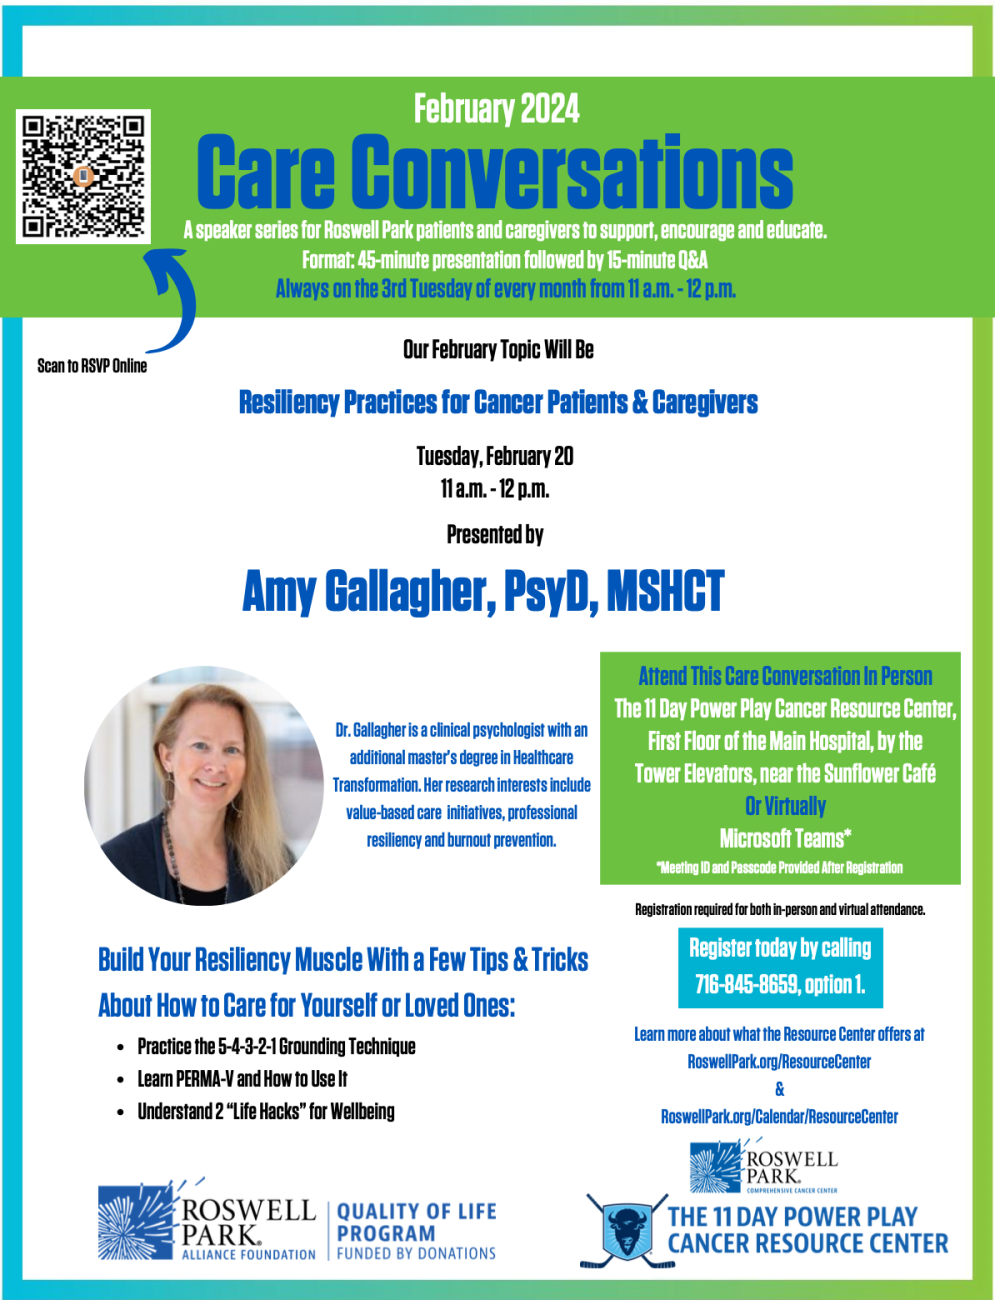 Care Conversations flyer - Resiliency with Amy Gallagher, PsyD, MSHCT